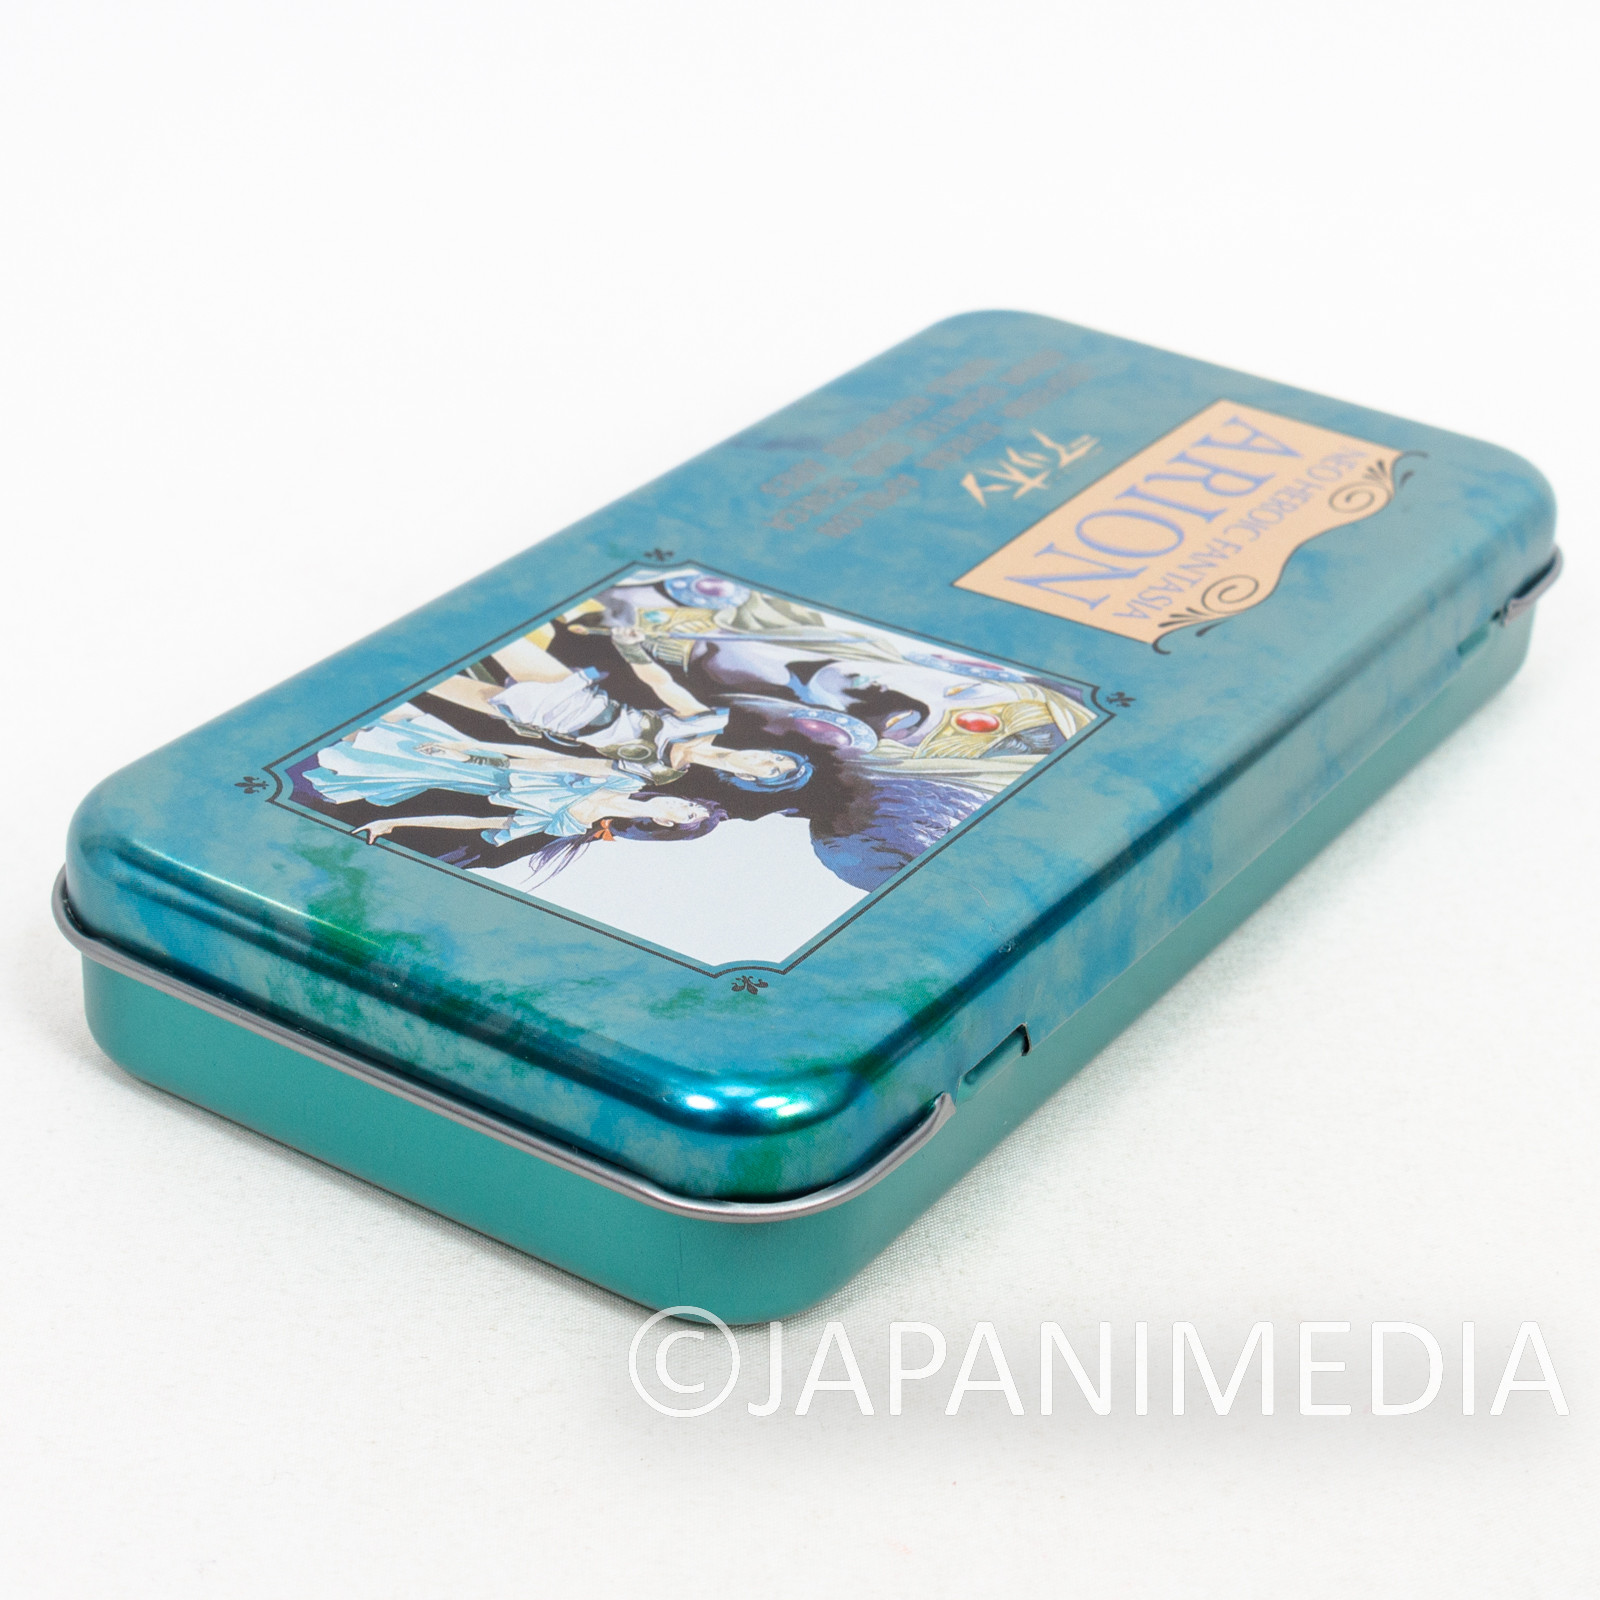 ARION Can Pen Case Animage JAPAN ANIME 2